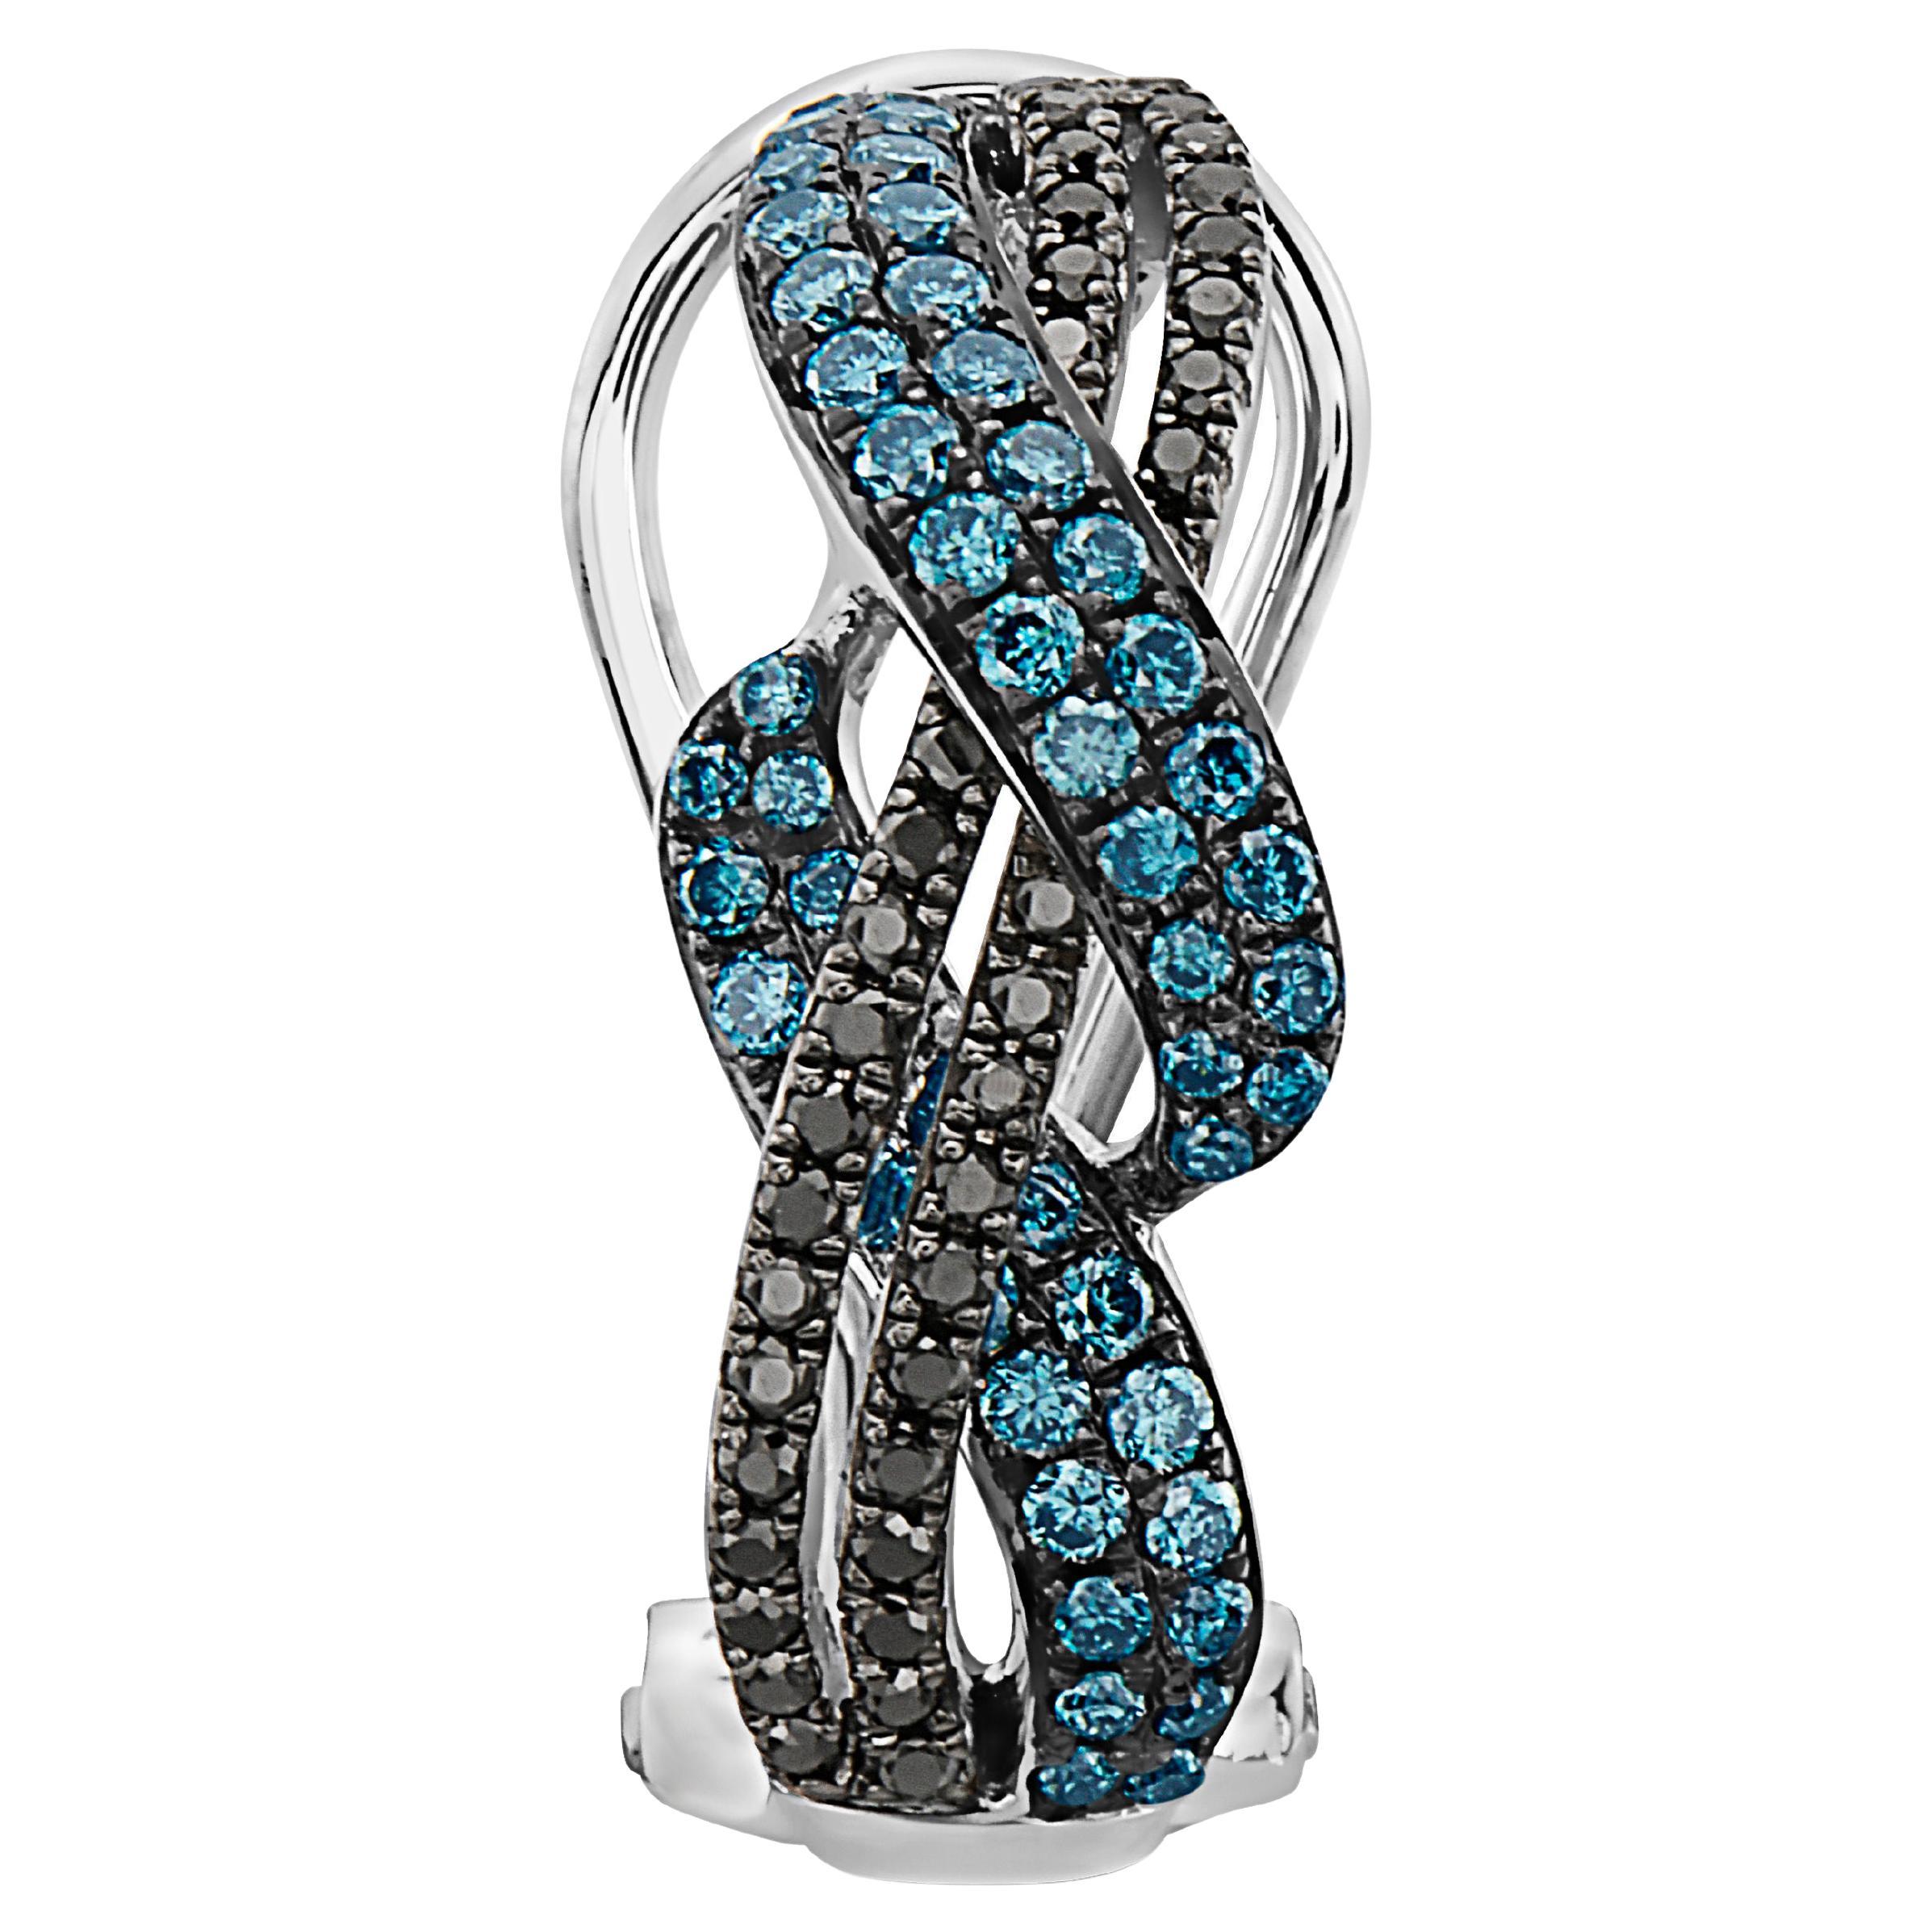 Grand Sample Sale Earrings 3/4 cts Blue and Black Diamonds Set in 14K White Gold For Sale